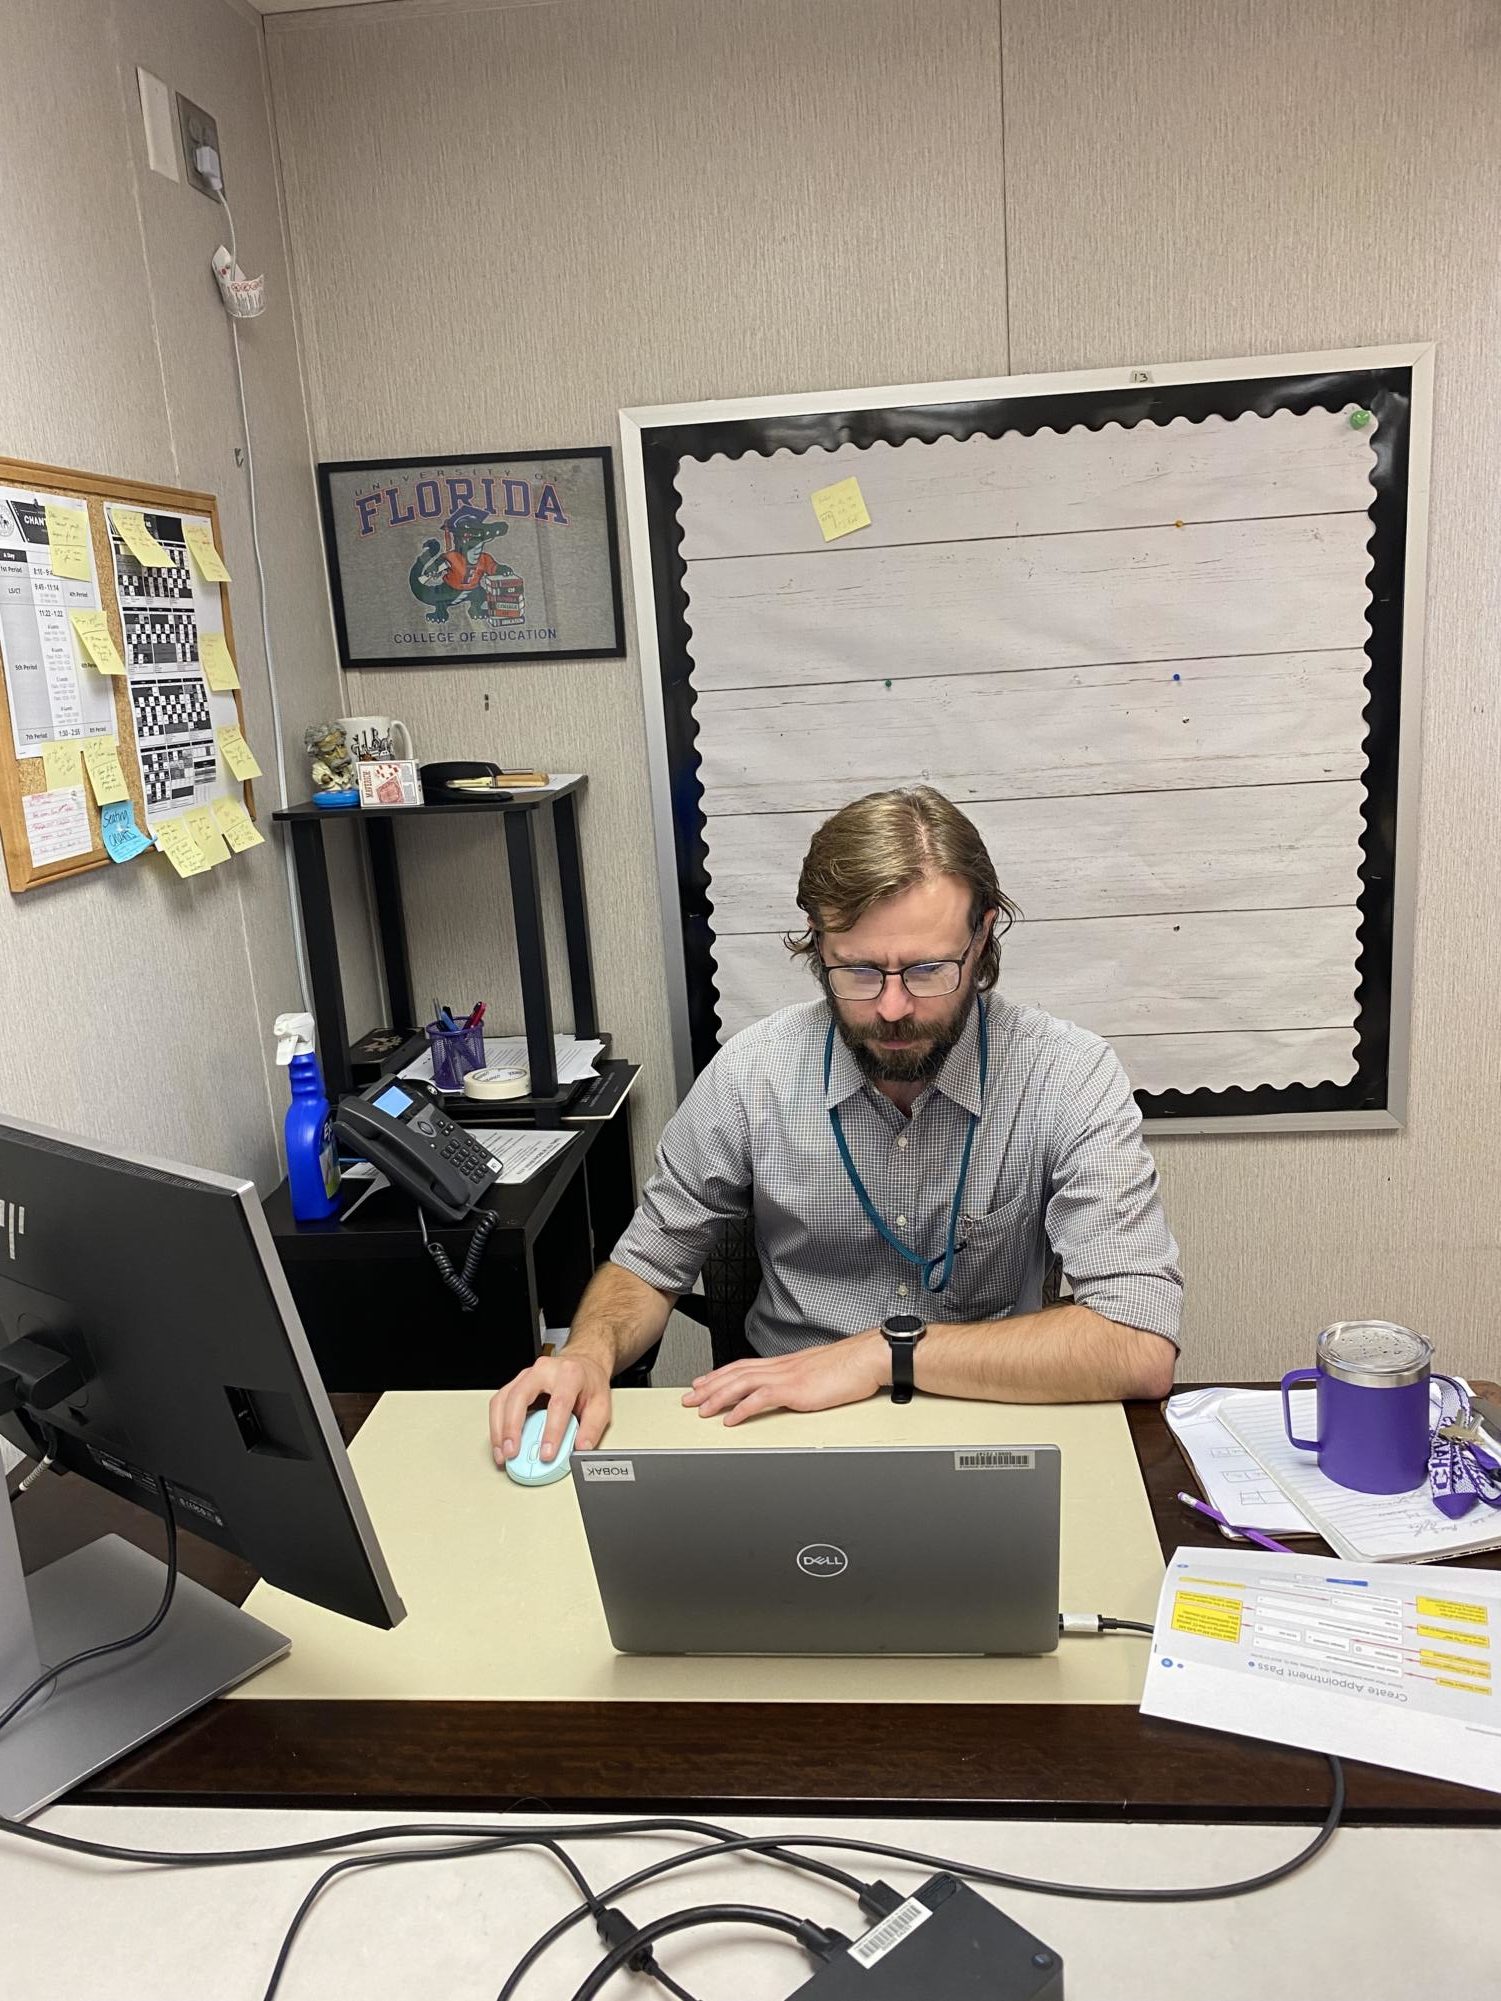 English teacher Stephen Robak prepares for his next class during his planning period.